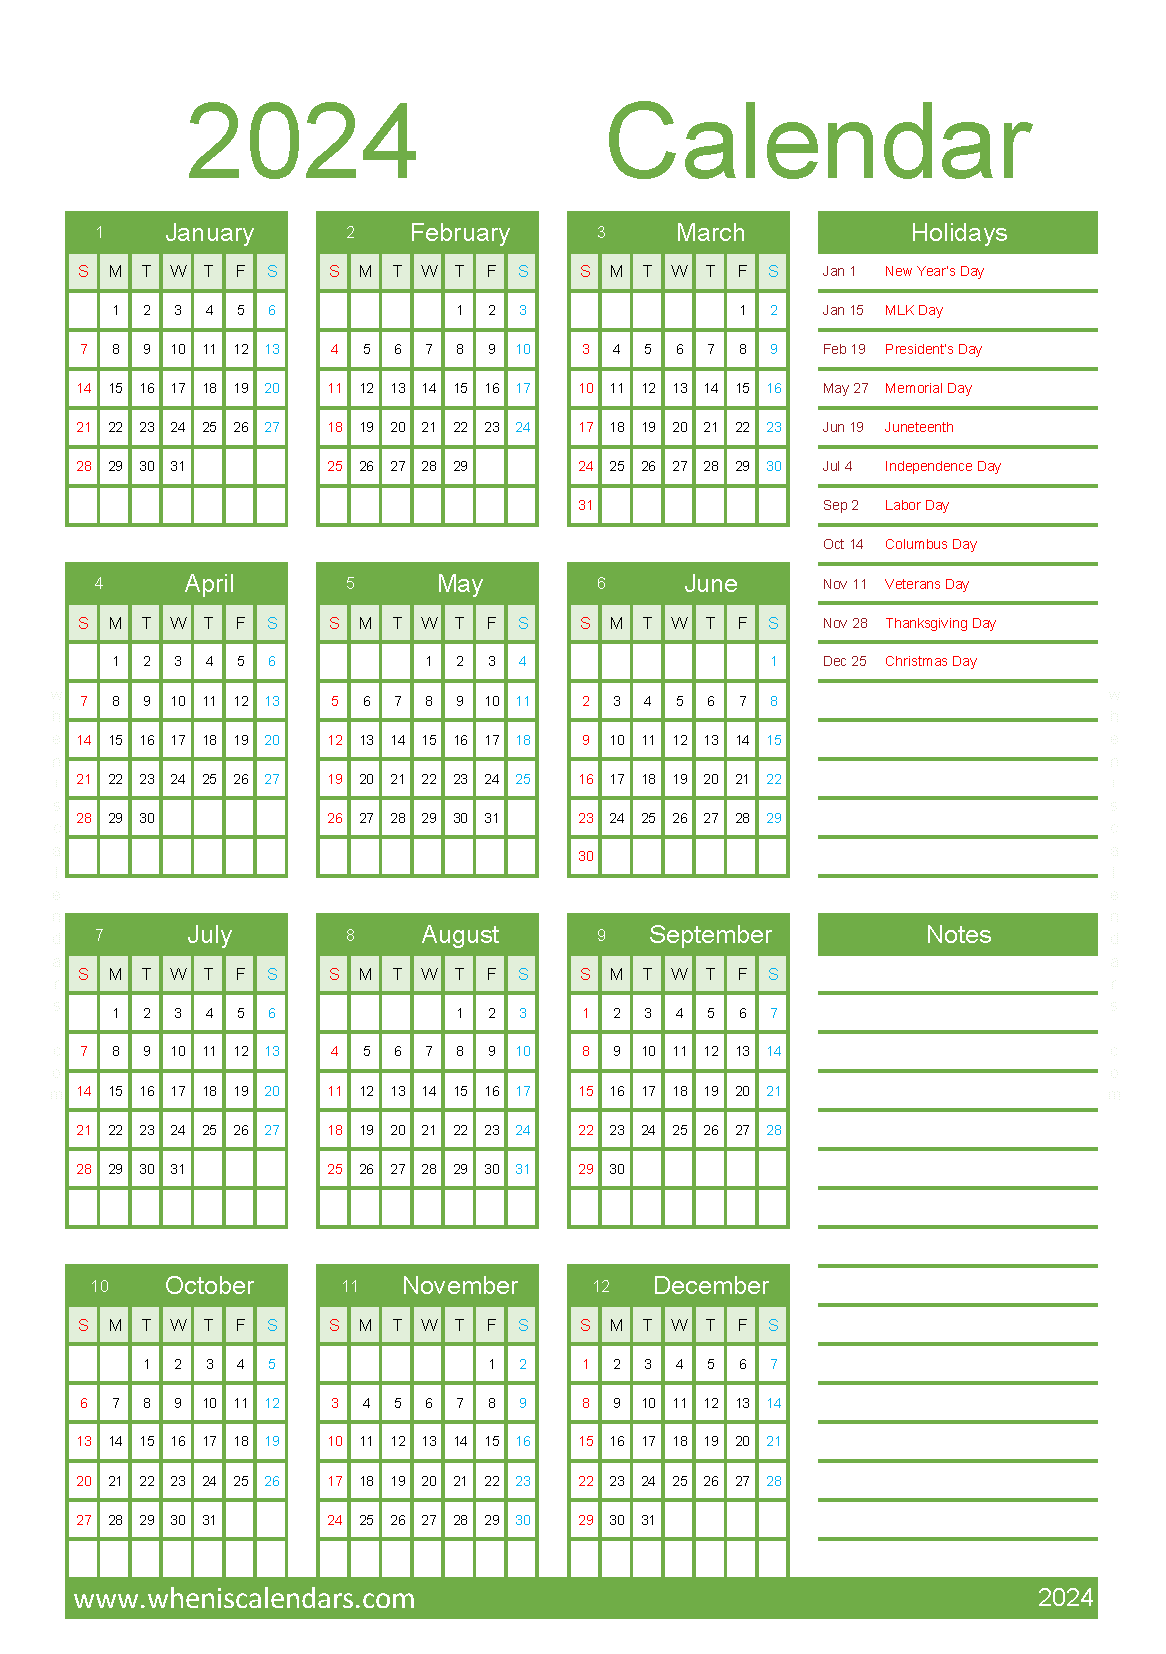 Free printable 2024 Calendar with Holidays A5 in vertical portrait